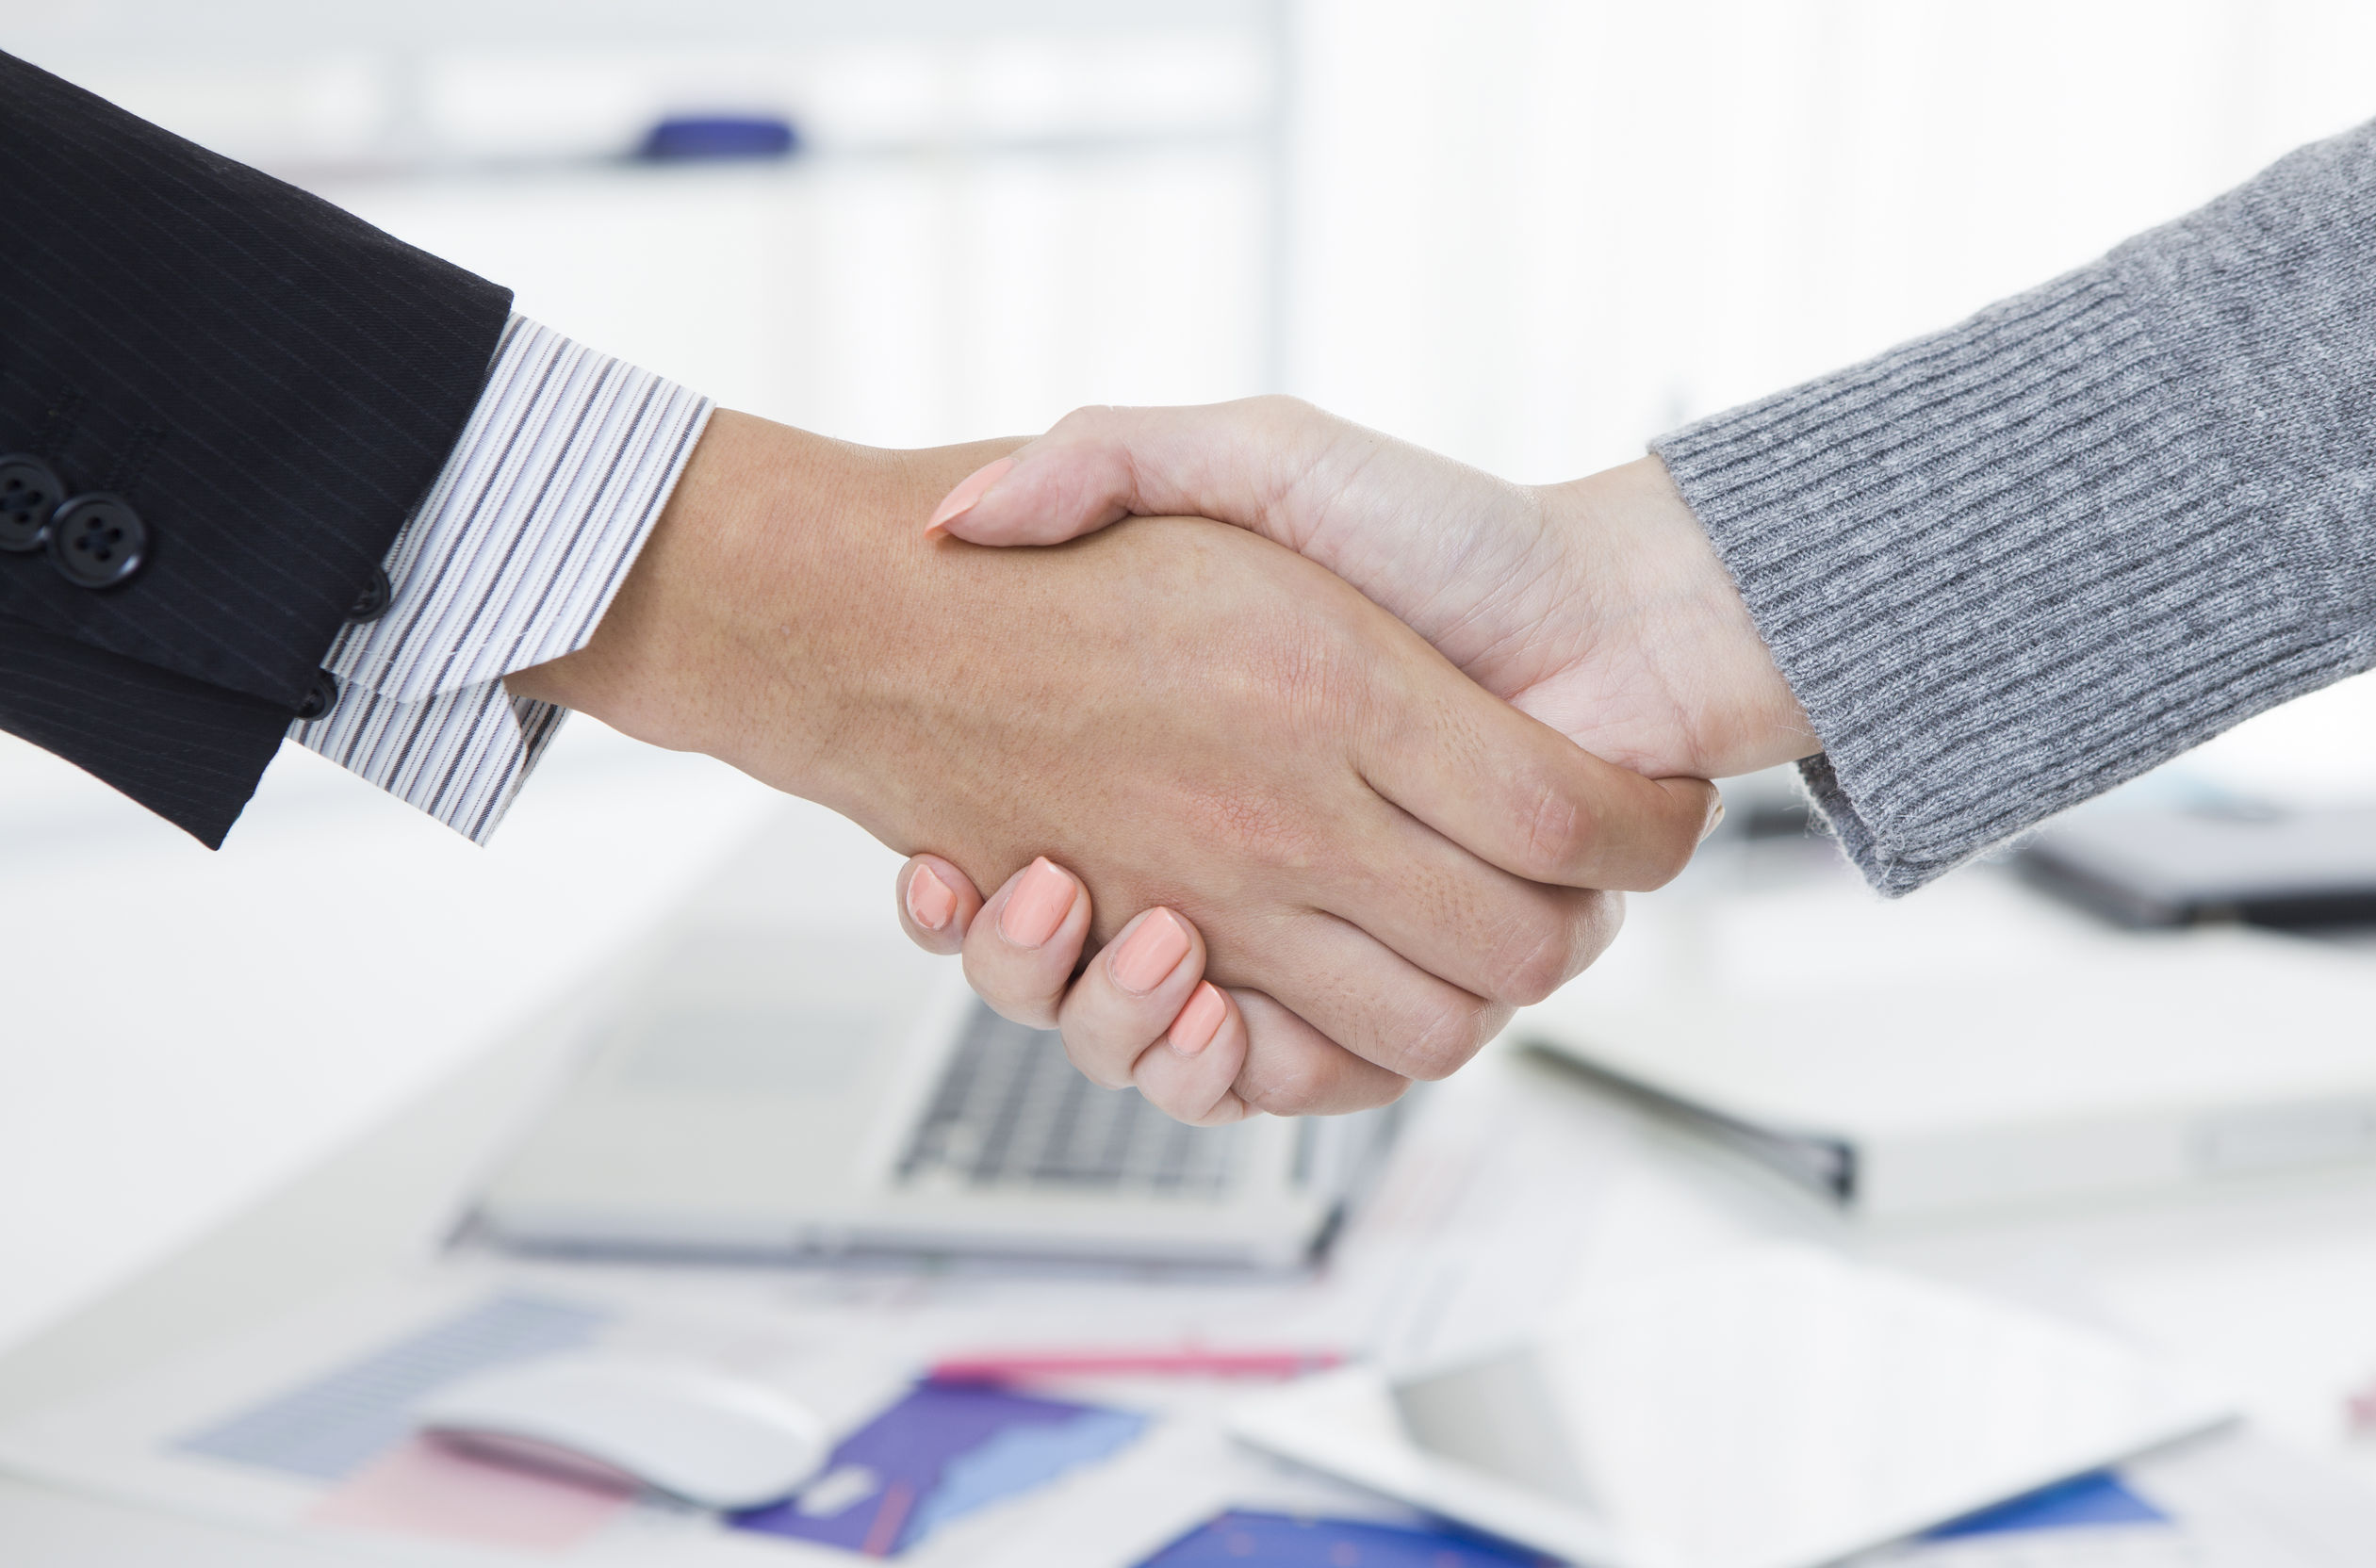 Man and woman formally shaking hands office setting